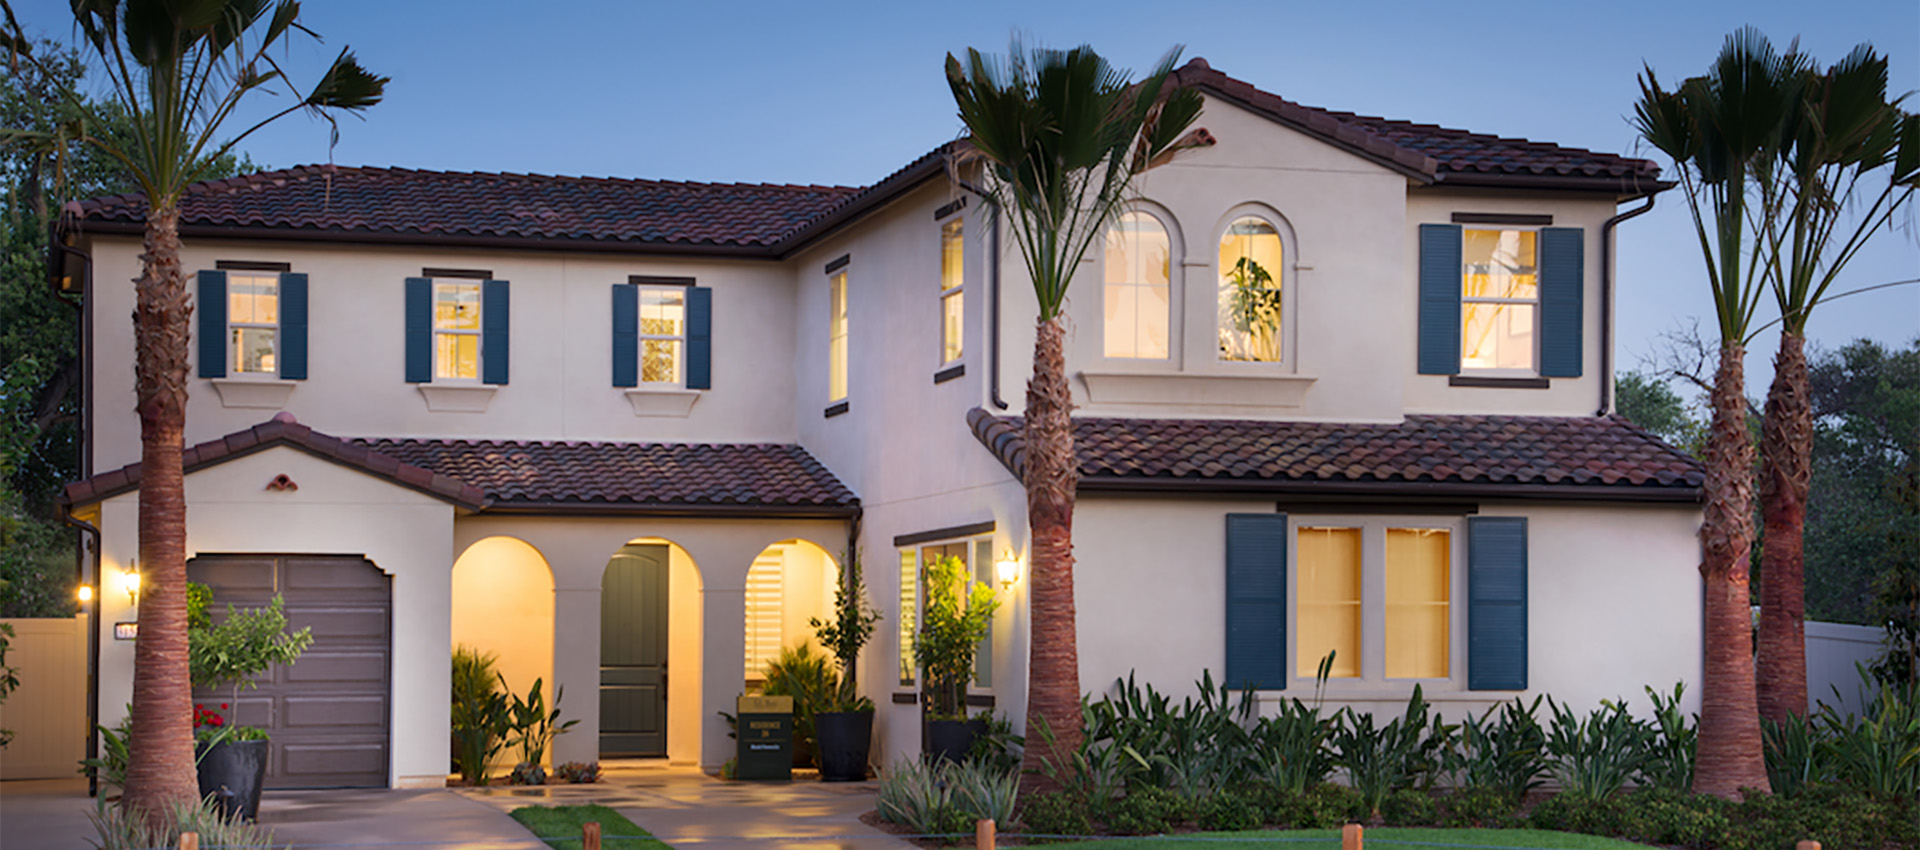 Image of a model home at S.L. Rey